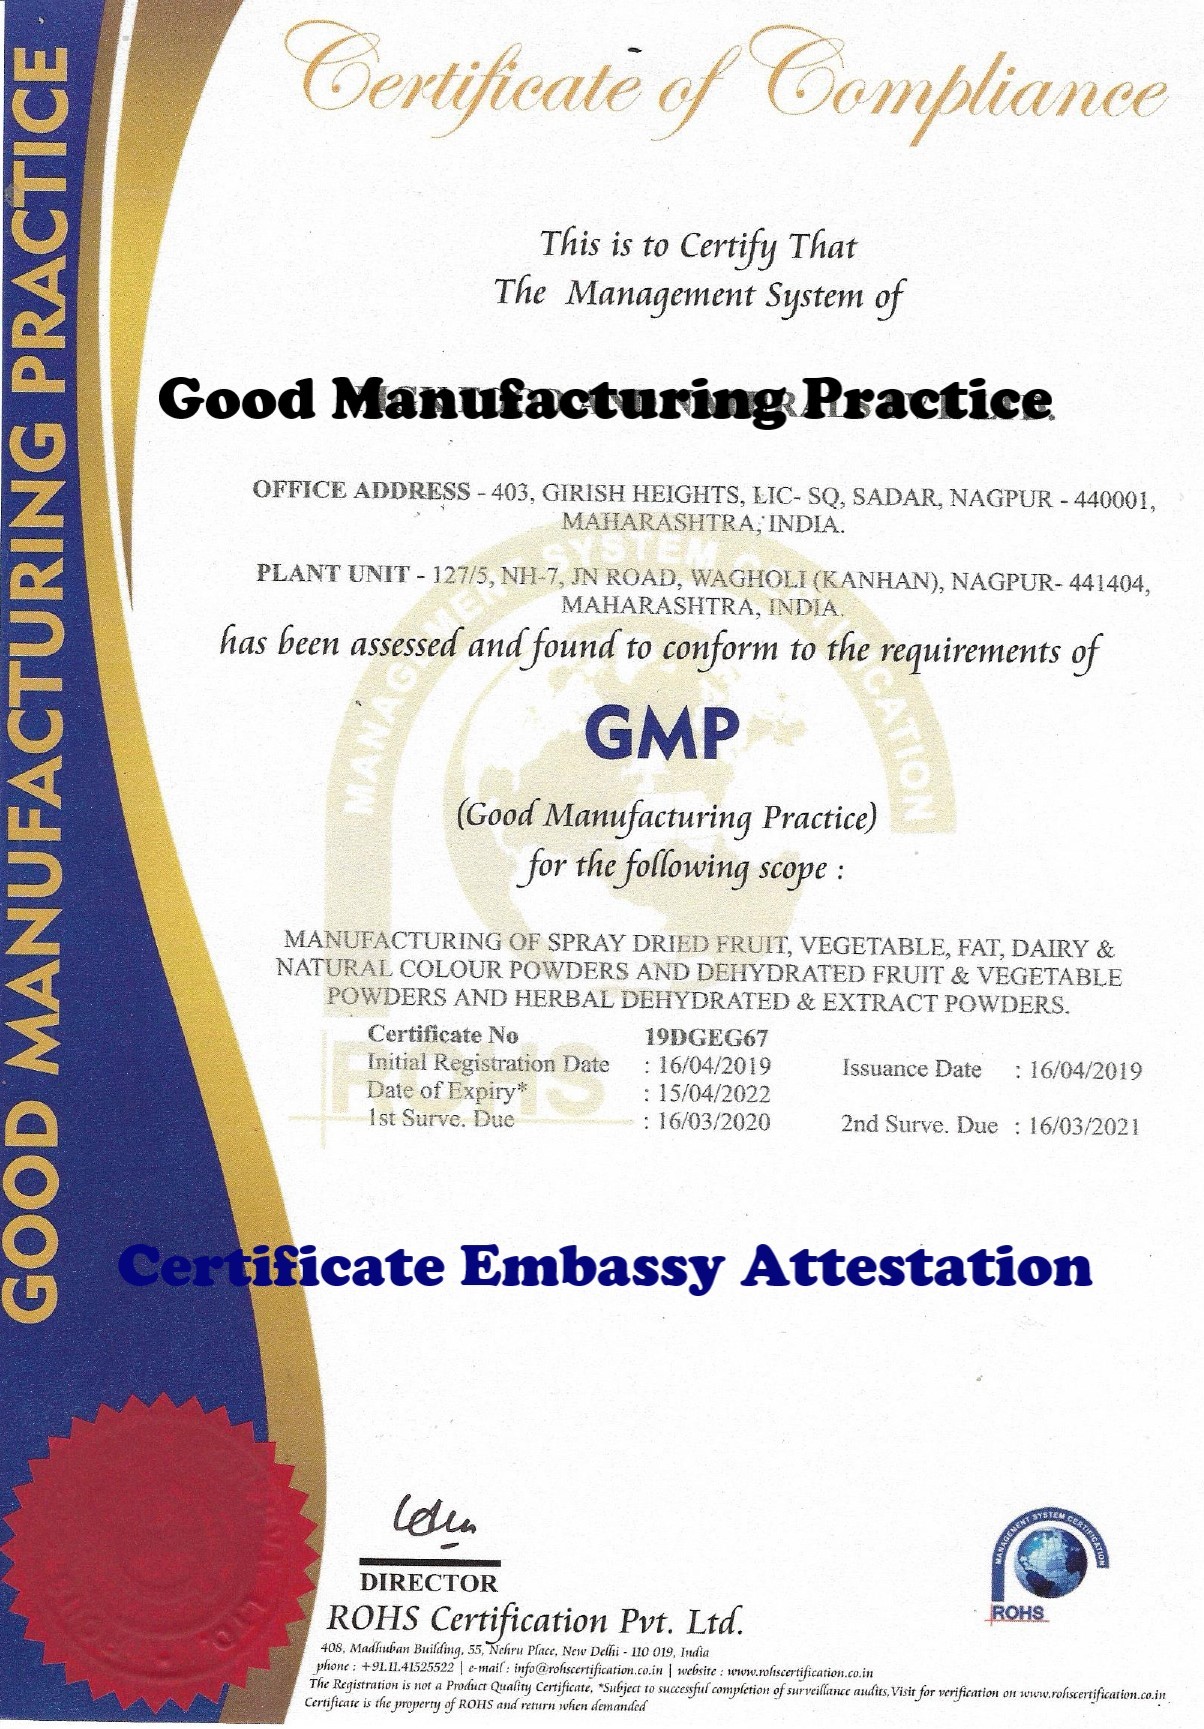 GMP Certificate Attestation from United Arab Emirates Embassy